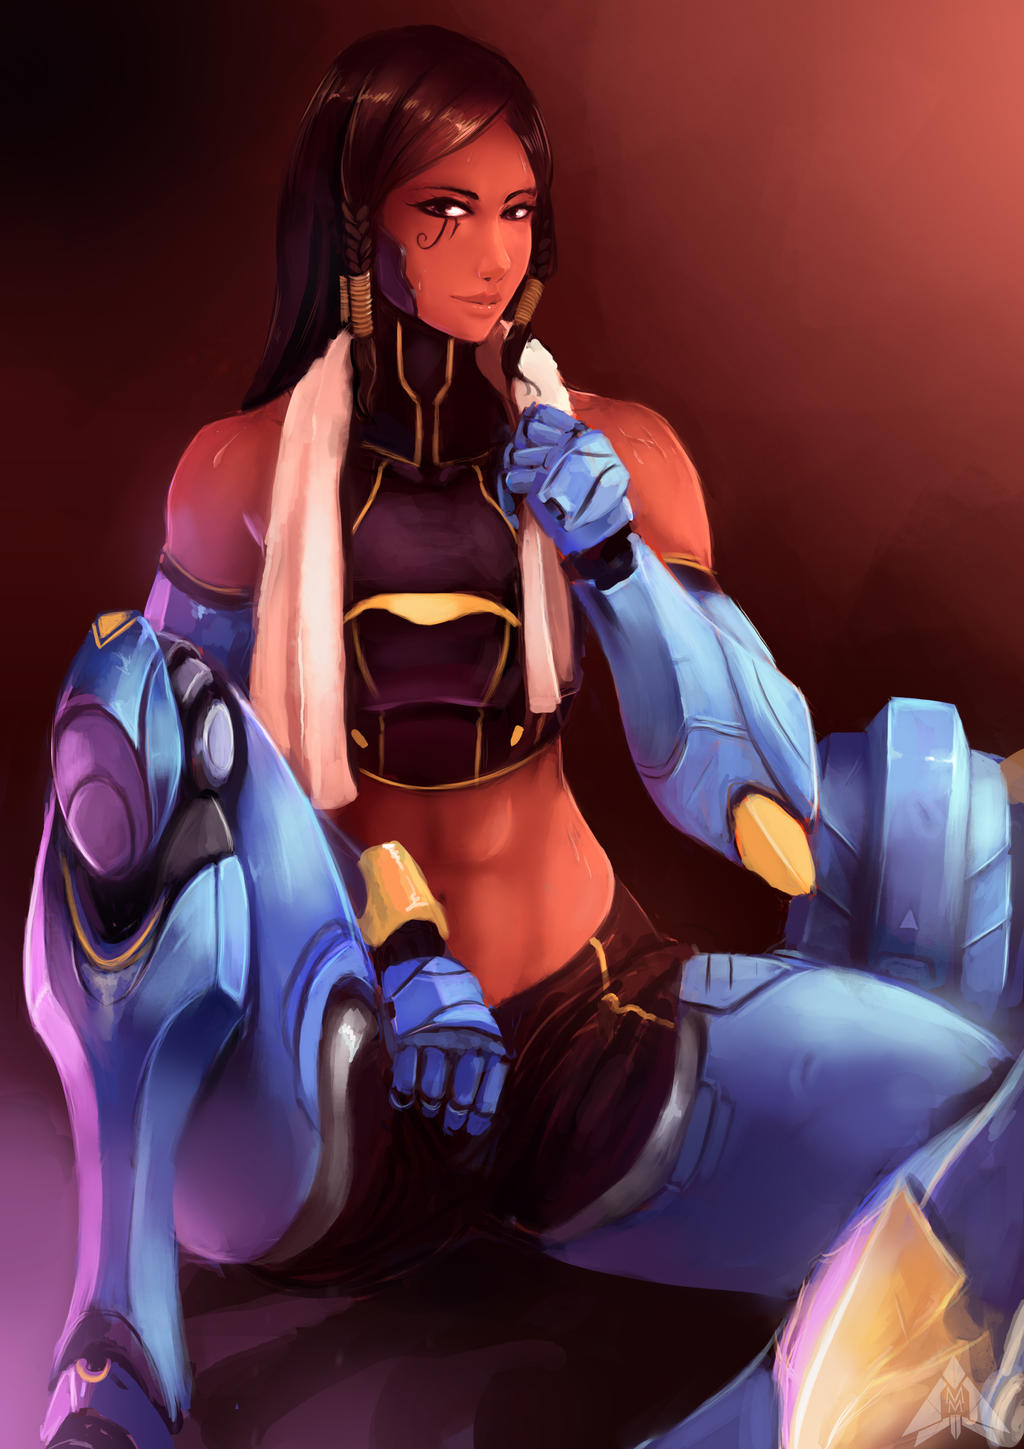 Pharah taking a breather